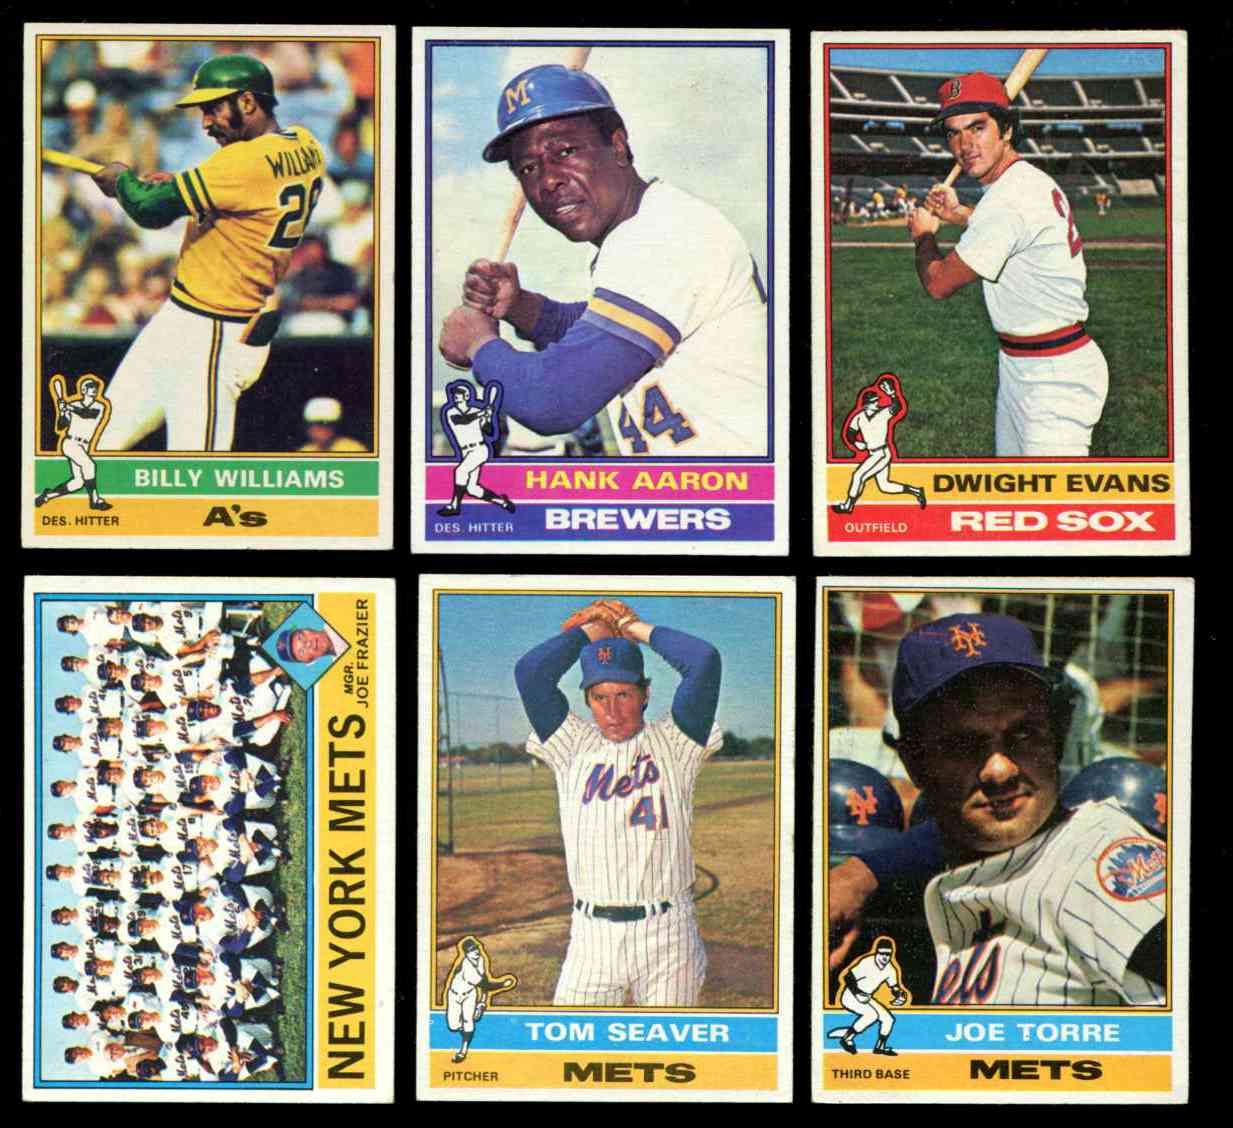 Sold at Auction: 25 Different 1976 Topps Baseball Cards - Rico Petrocelli +  More